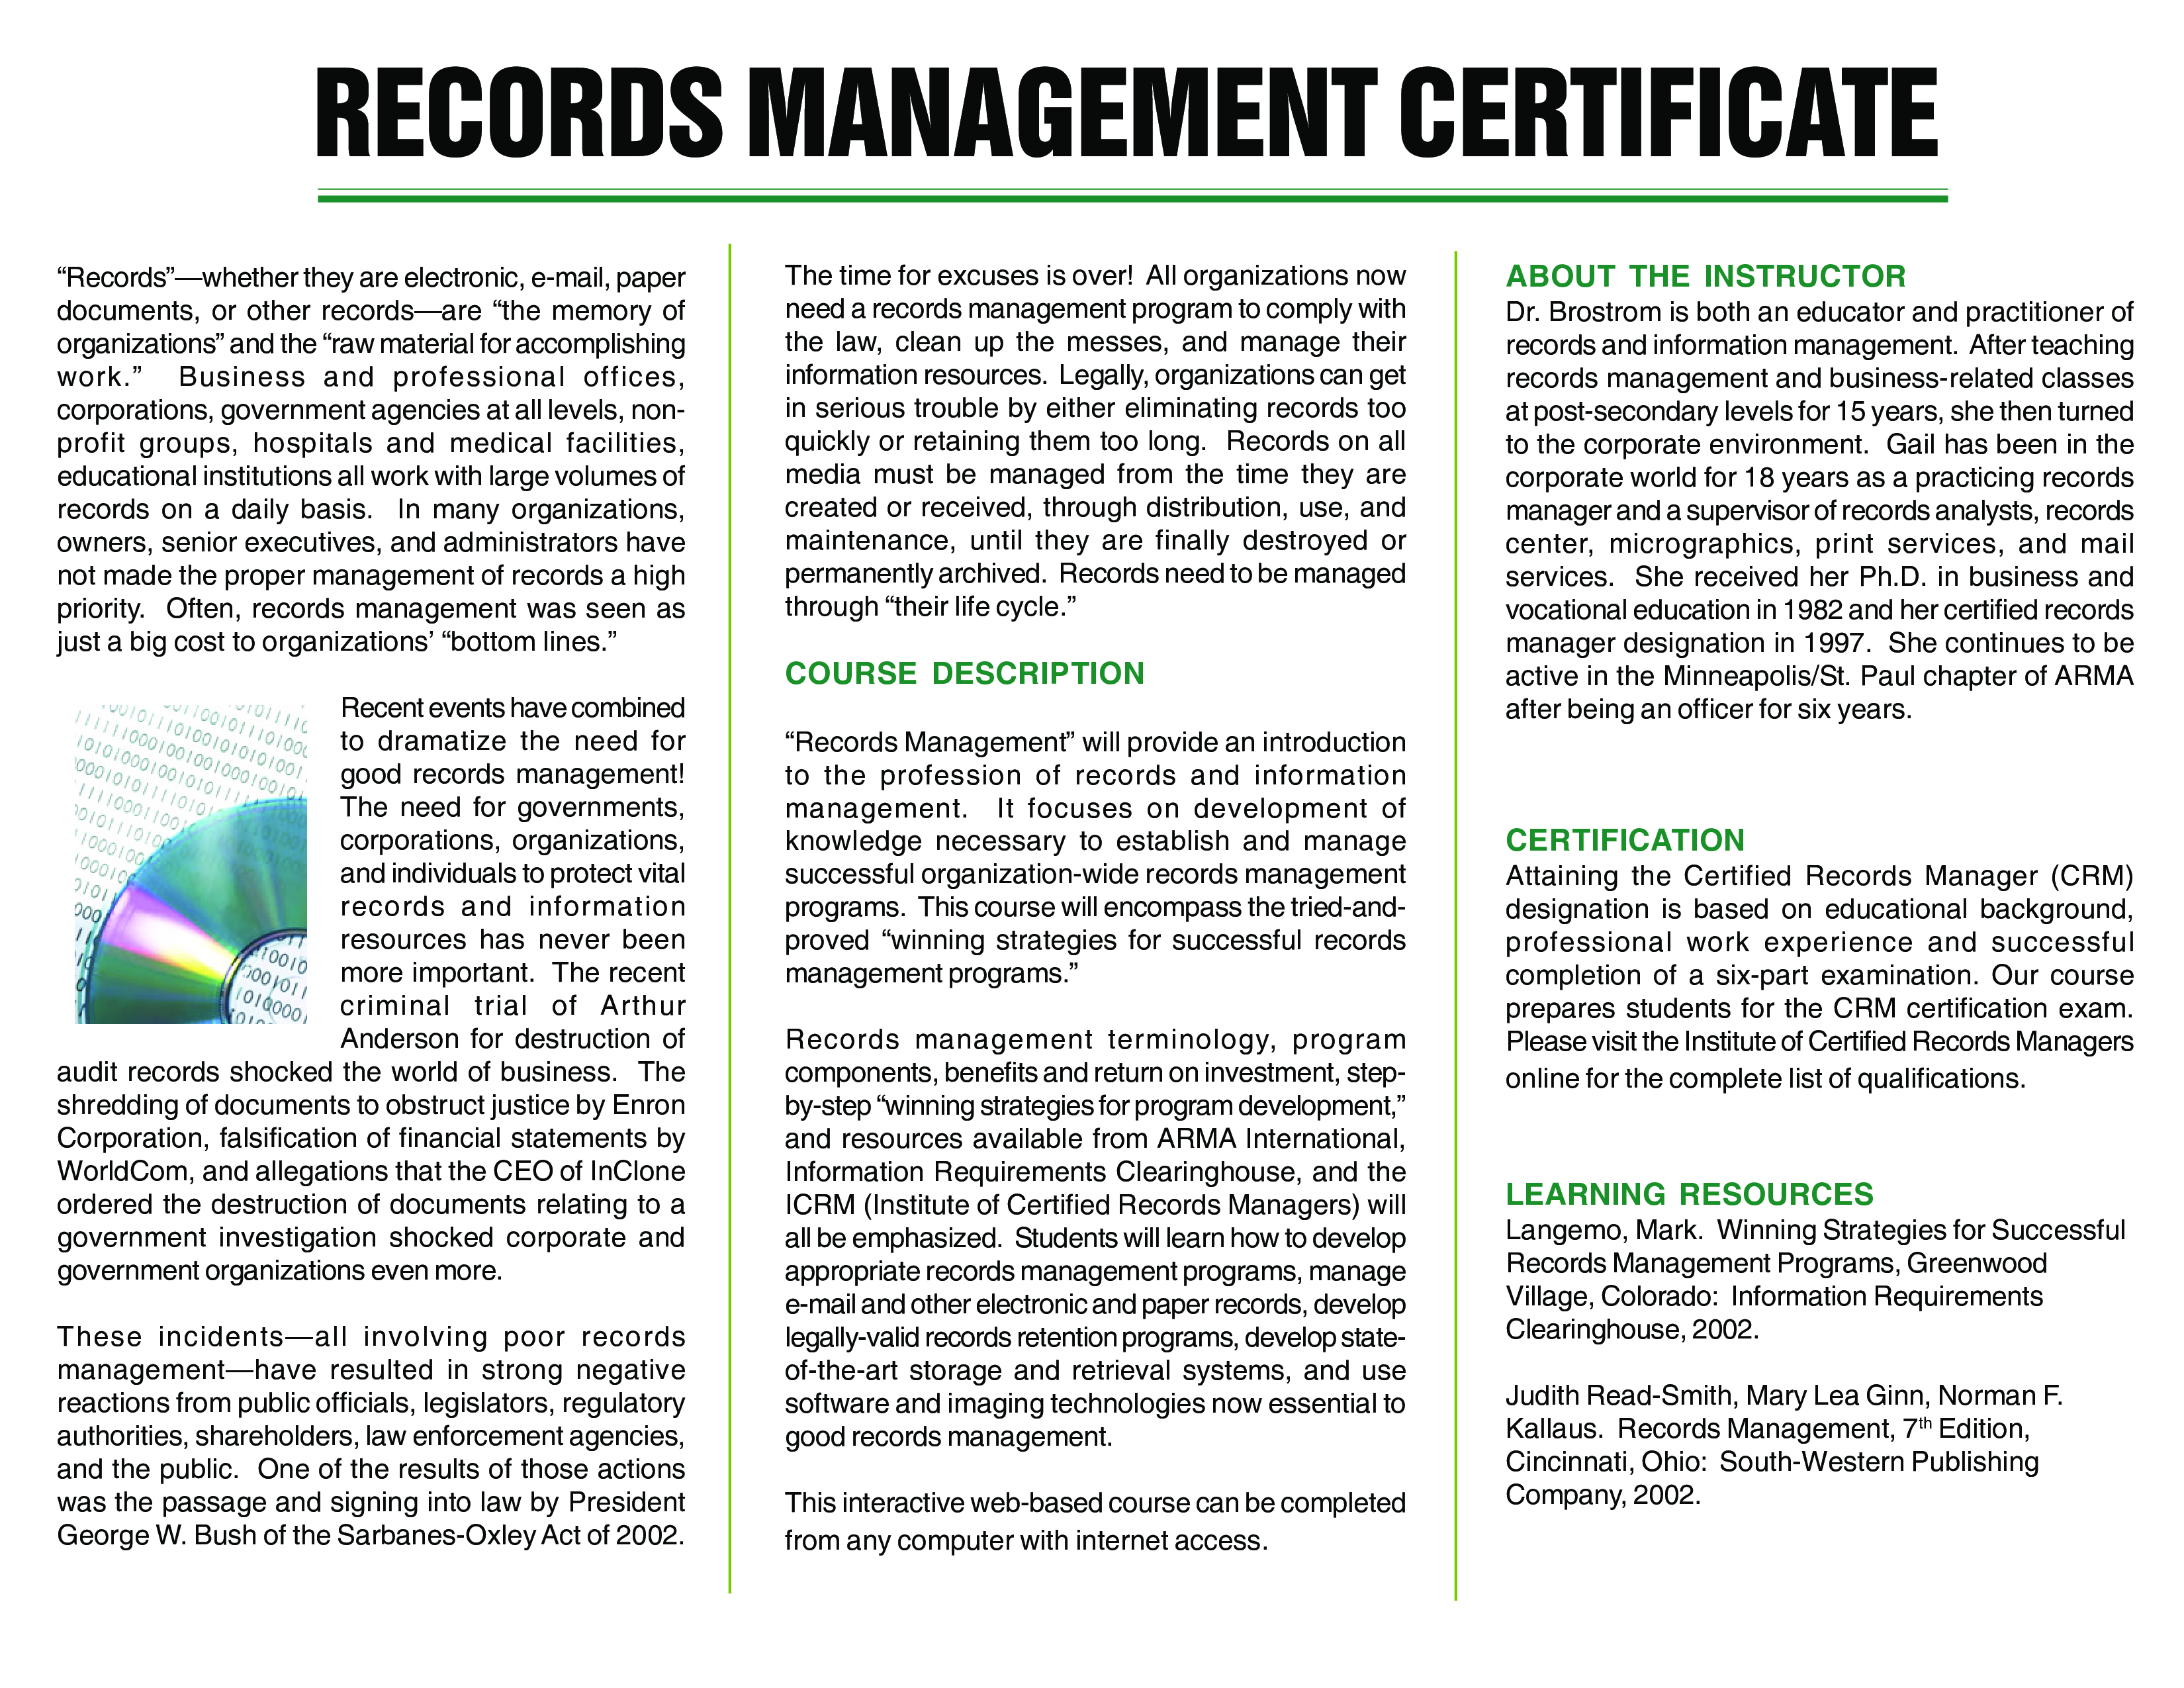 Records Management Training Certificate main image